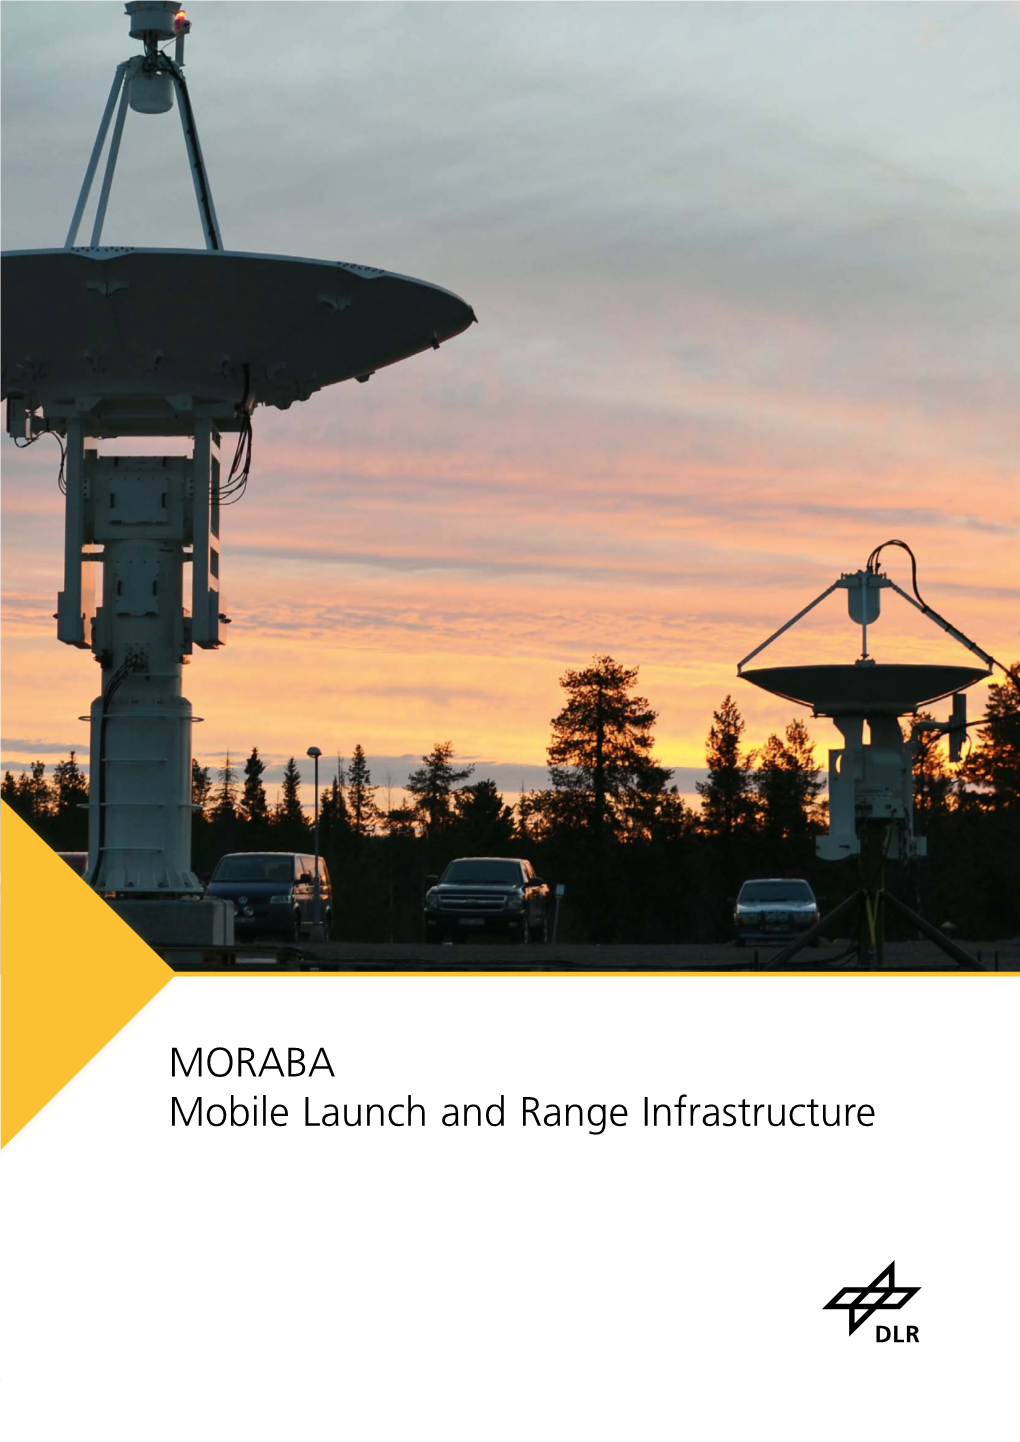 MORABA Mobile Launch and Range Infrastructure